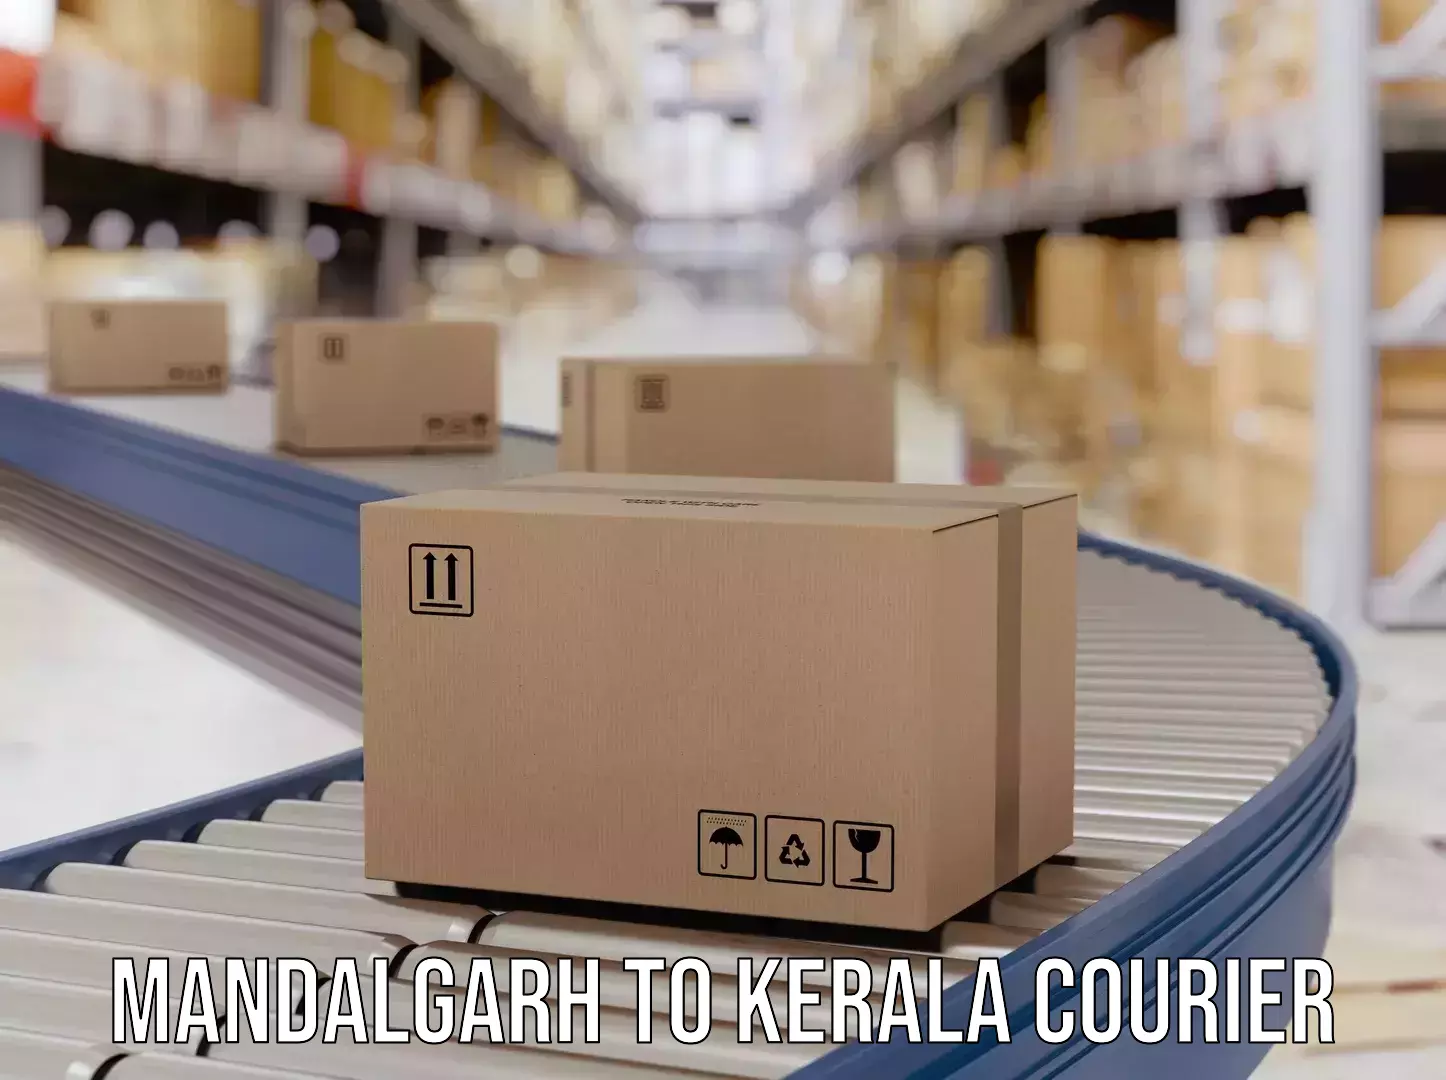 State-of-the-art courier technology Mandalgarh to Panthalam